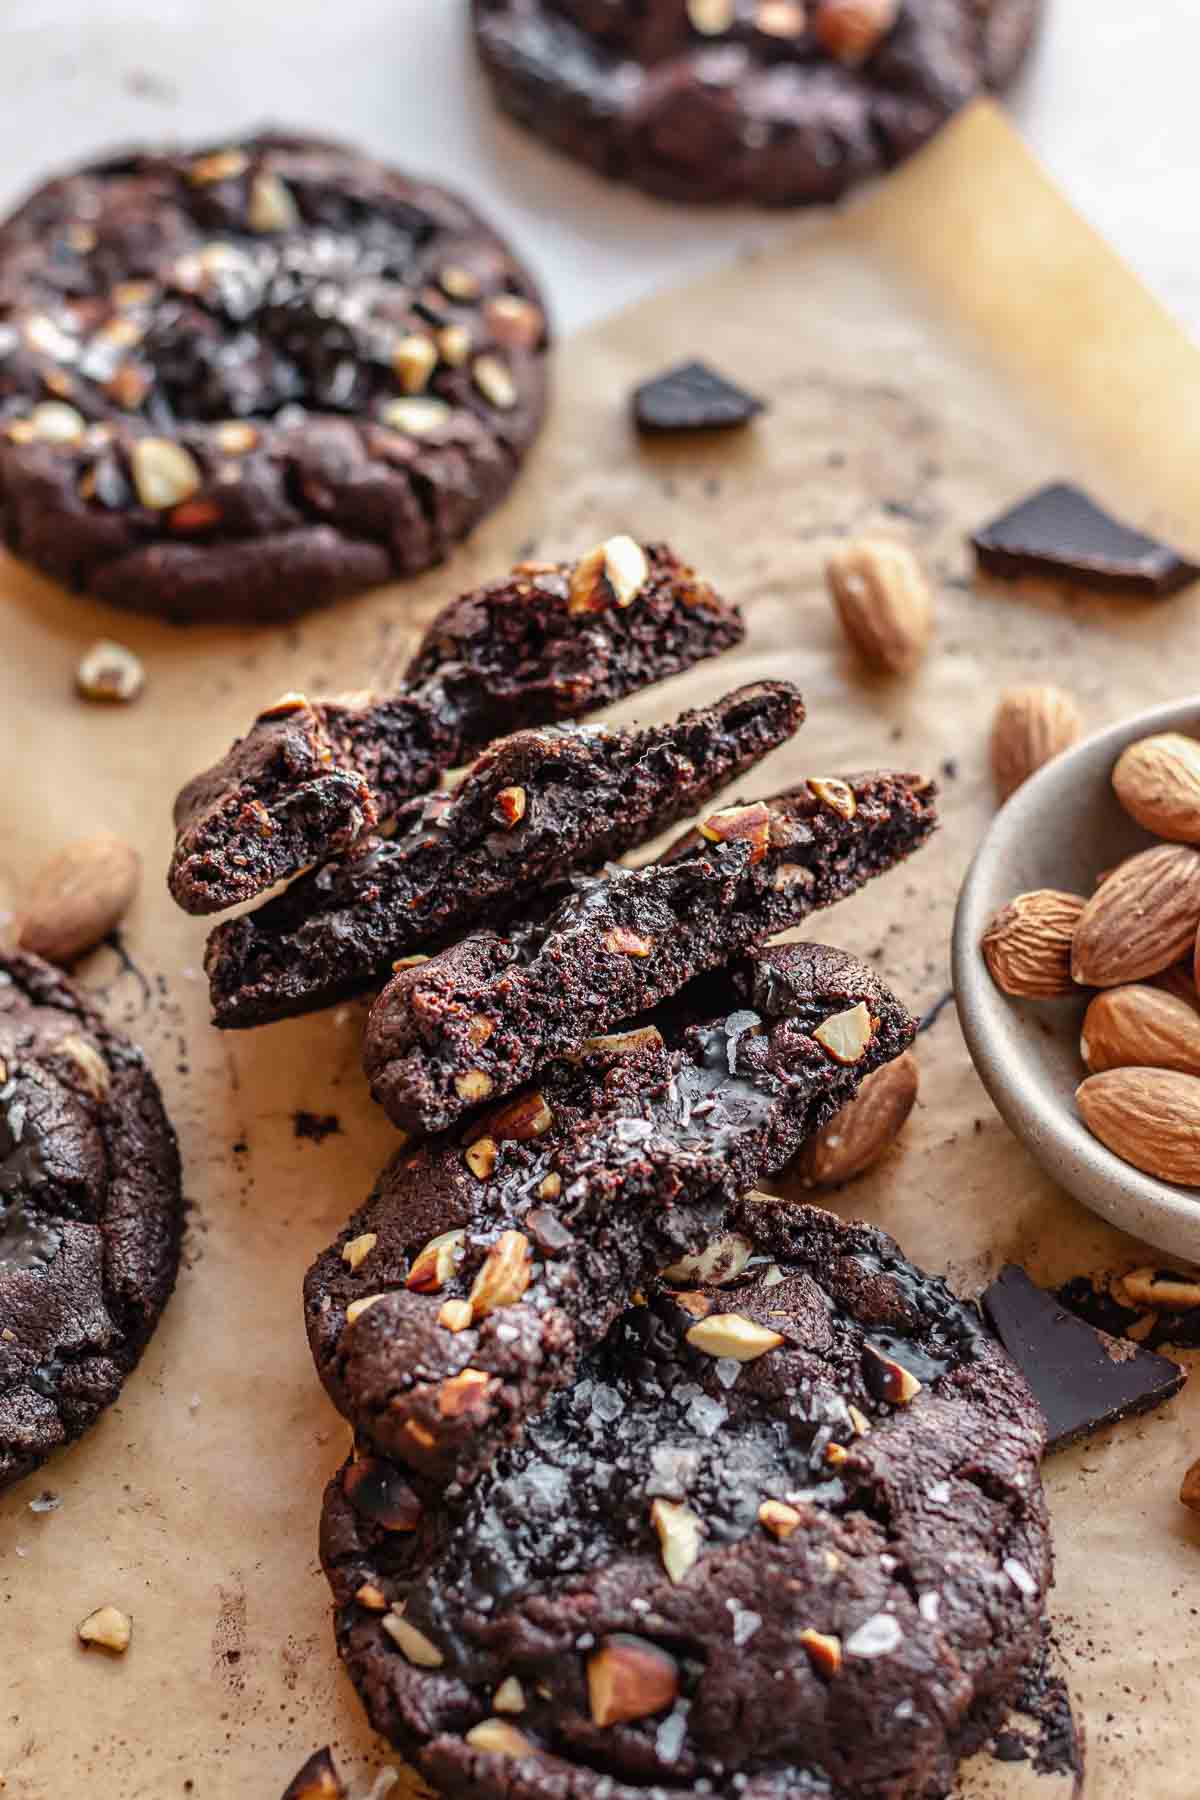 Almond chocolate cookies broken open and leaning against each other.